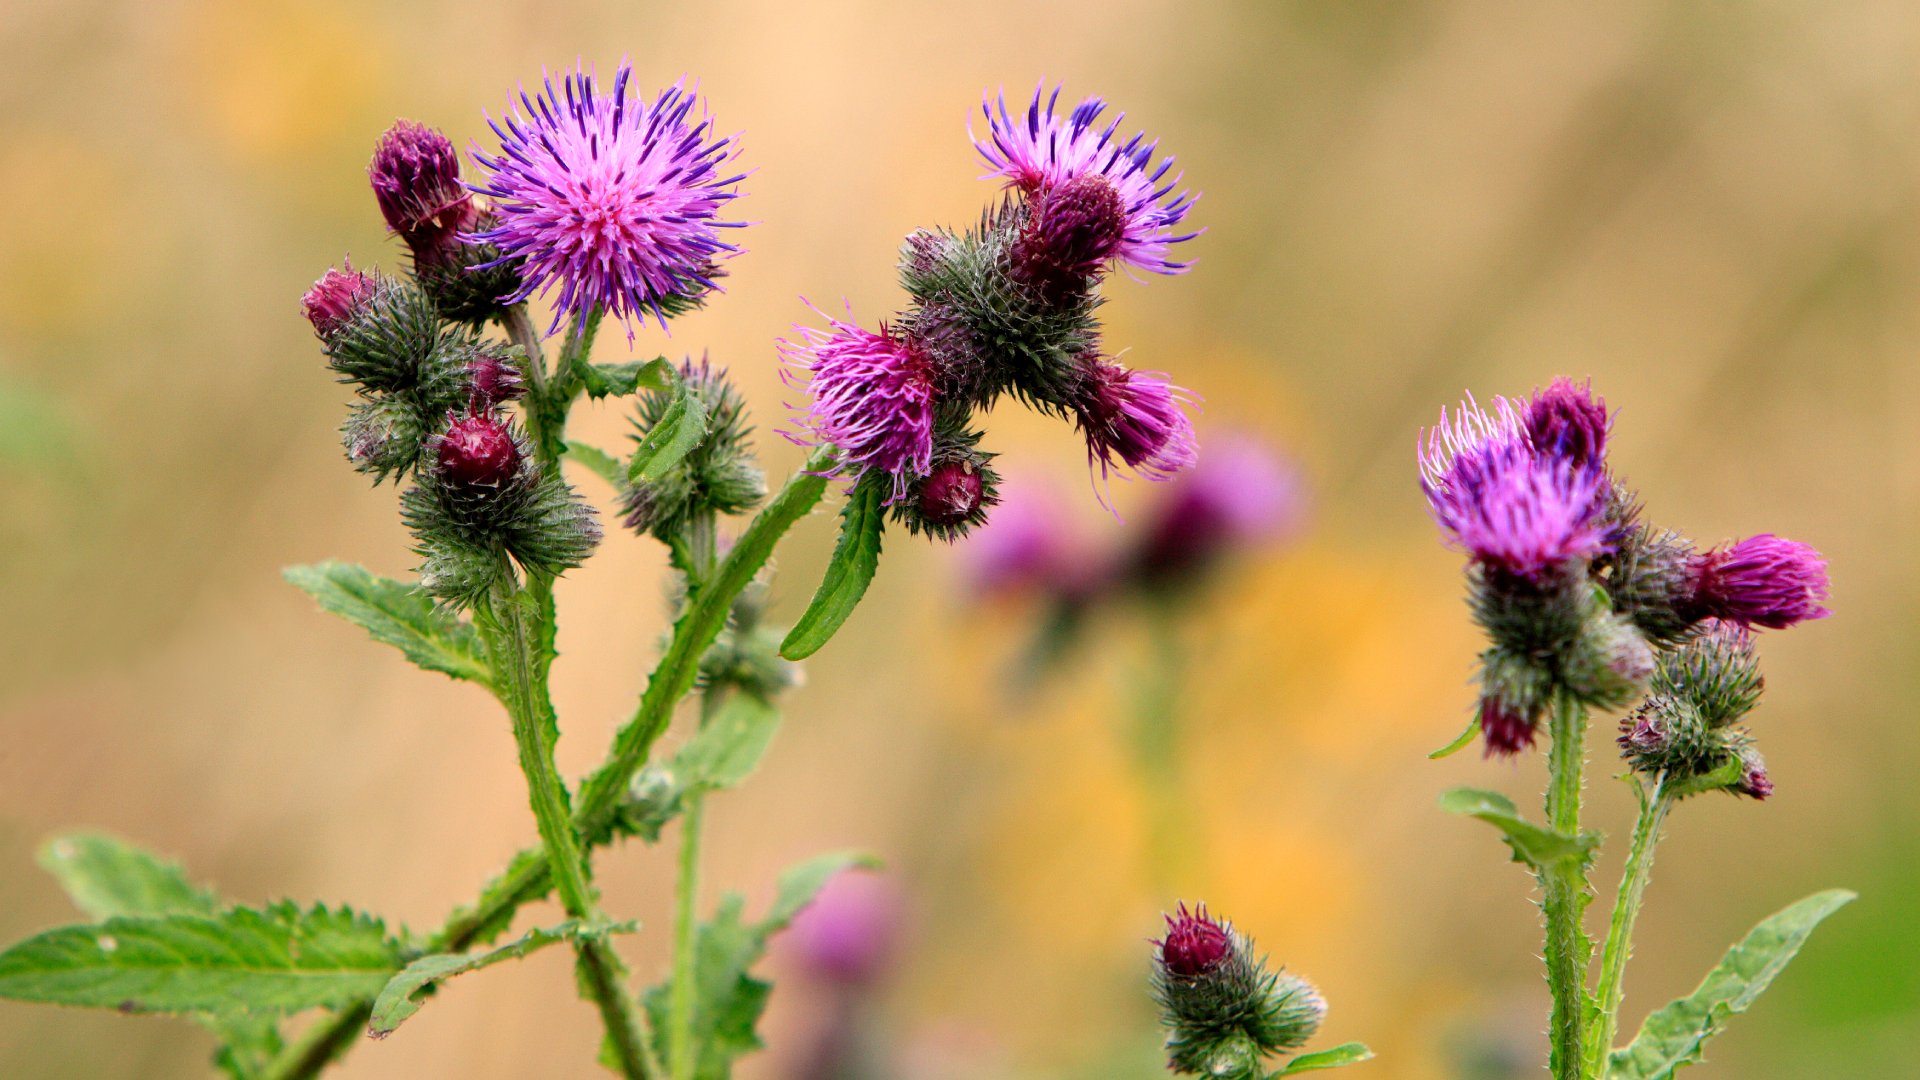 Be on the Lookout for These 4 Weeds That Grow During the Summer in Texas